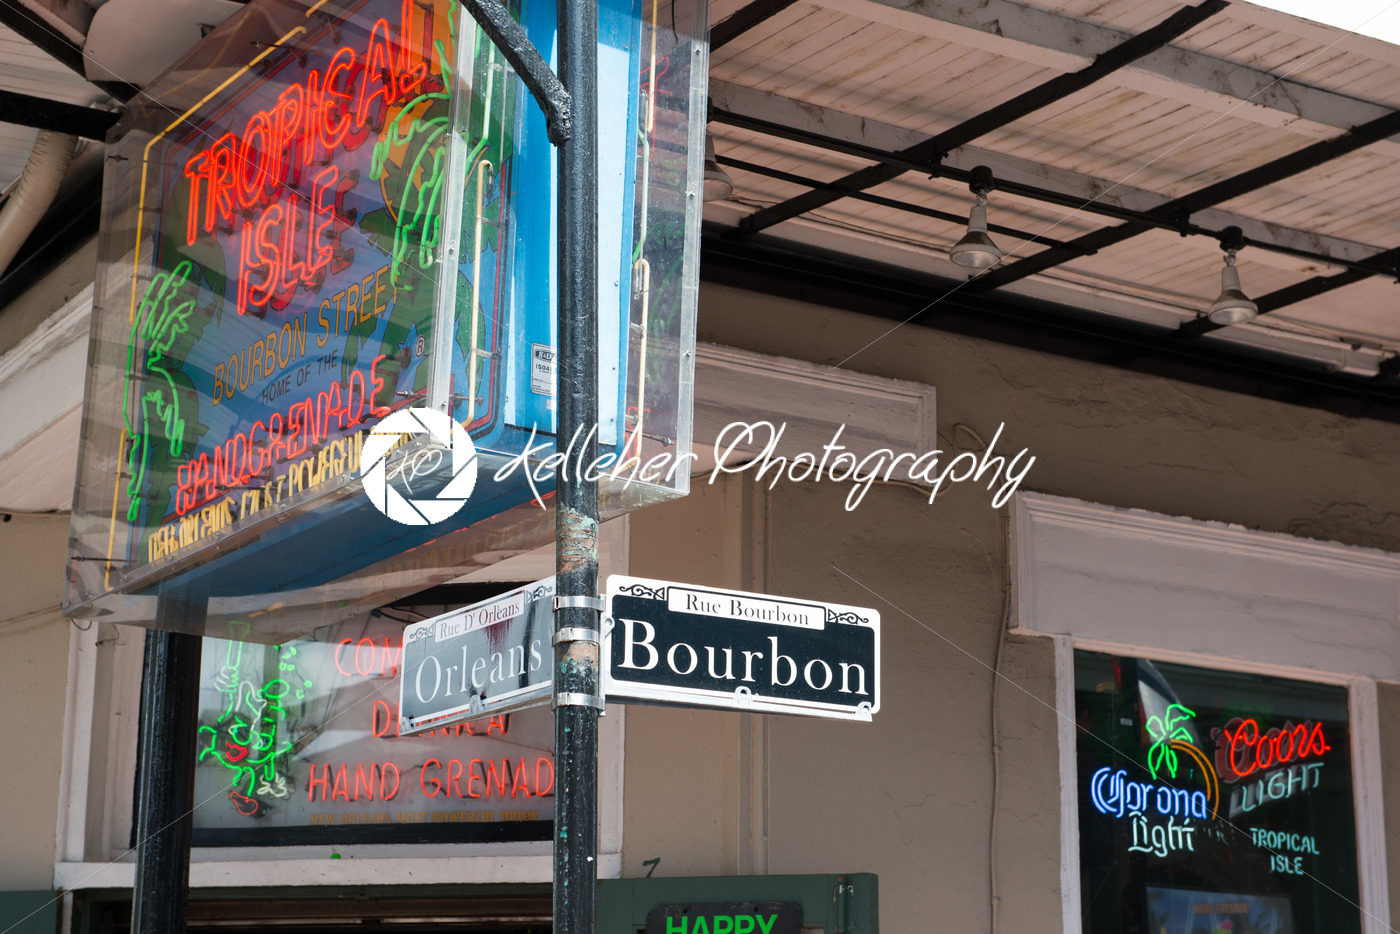 NEW ORLEANS, LA – APRIL 13: Bourbon and Orleans Street sign in the French Quarter of New Orleans, Louisiana on April 13, 2014 - Kelleher Photography Store